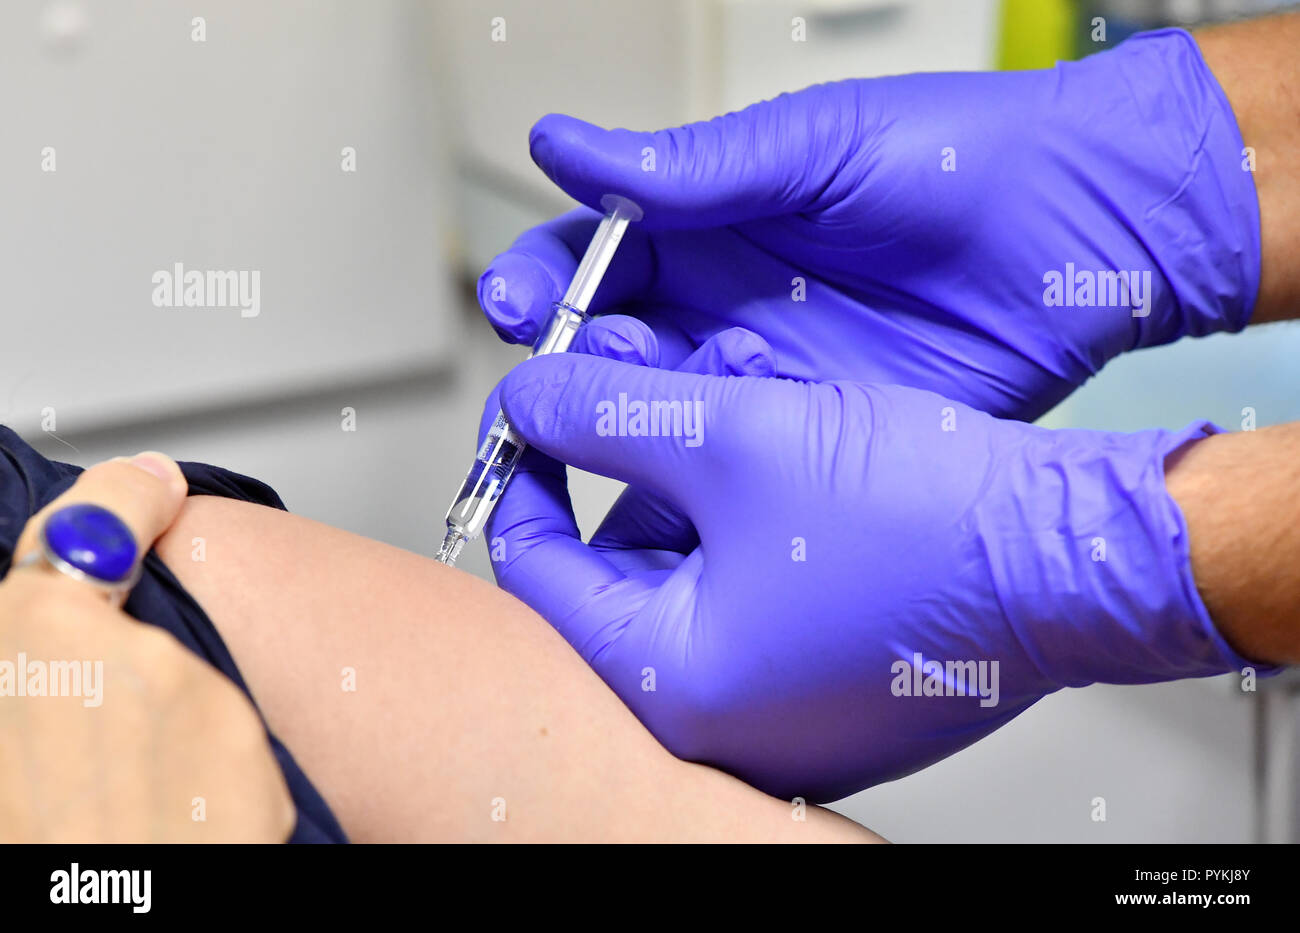 29 October 2018, Thuringia, Erfurt: Heike Werner (Die Linke), Thuringian Minister of Health, is vaccinated against influenza in the polyclinic of Dr. med. Kielstein Ambulante Medizinische Versorgung GmbH. One year after the start of a Thuringia-wide vaccination campaign for older people, the organisers draw up an interim balance on the same day. The 'Vaccination60 ' campaign, which runs until September 2019, is intended to lead to better vaccination protection for older people. The focus is on protective vaccinations against viral influenza and pneumococcal bacteria as causes of pneumonia. Pho Stock Photo